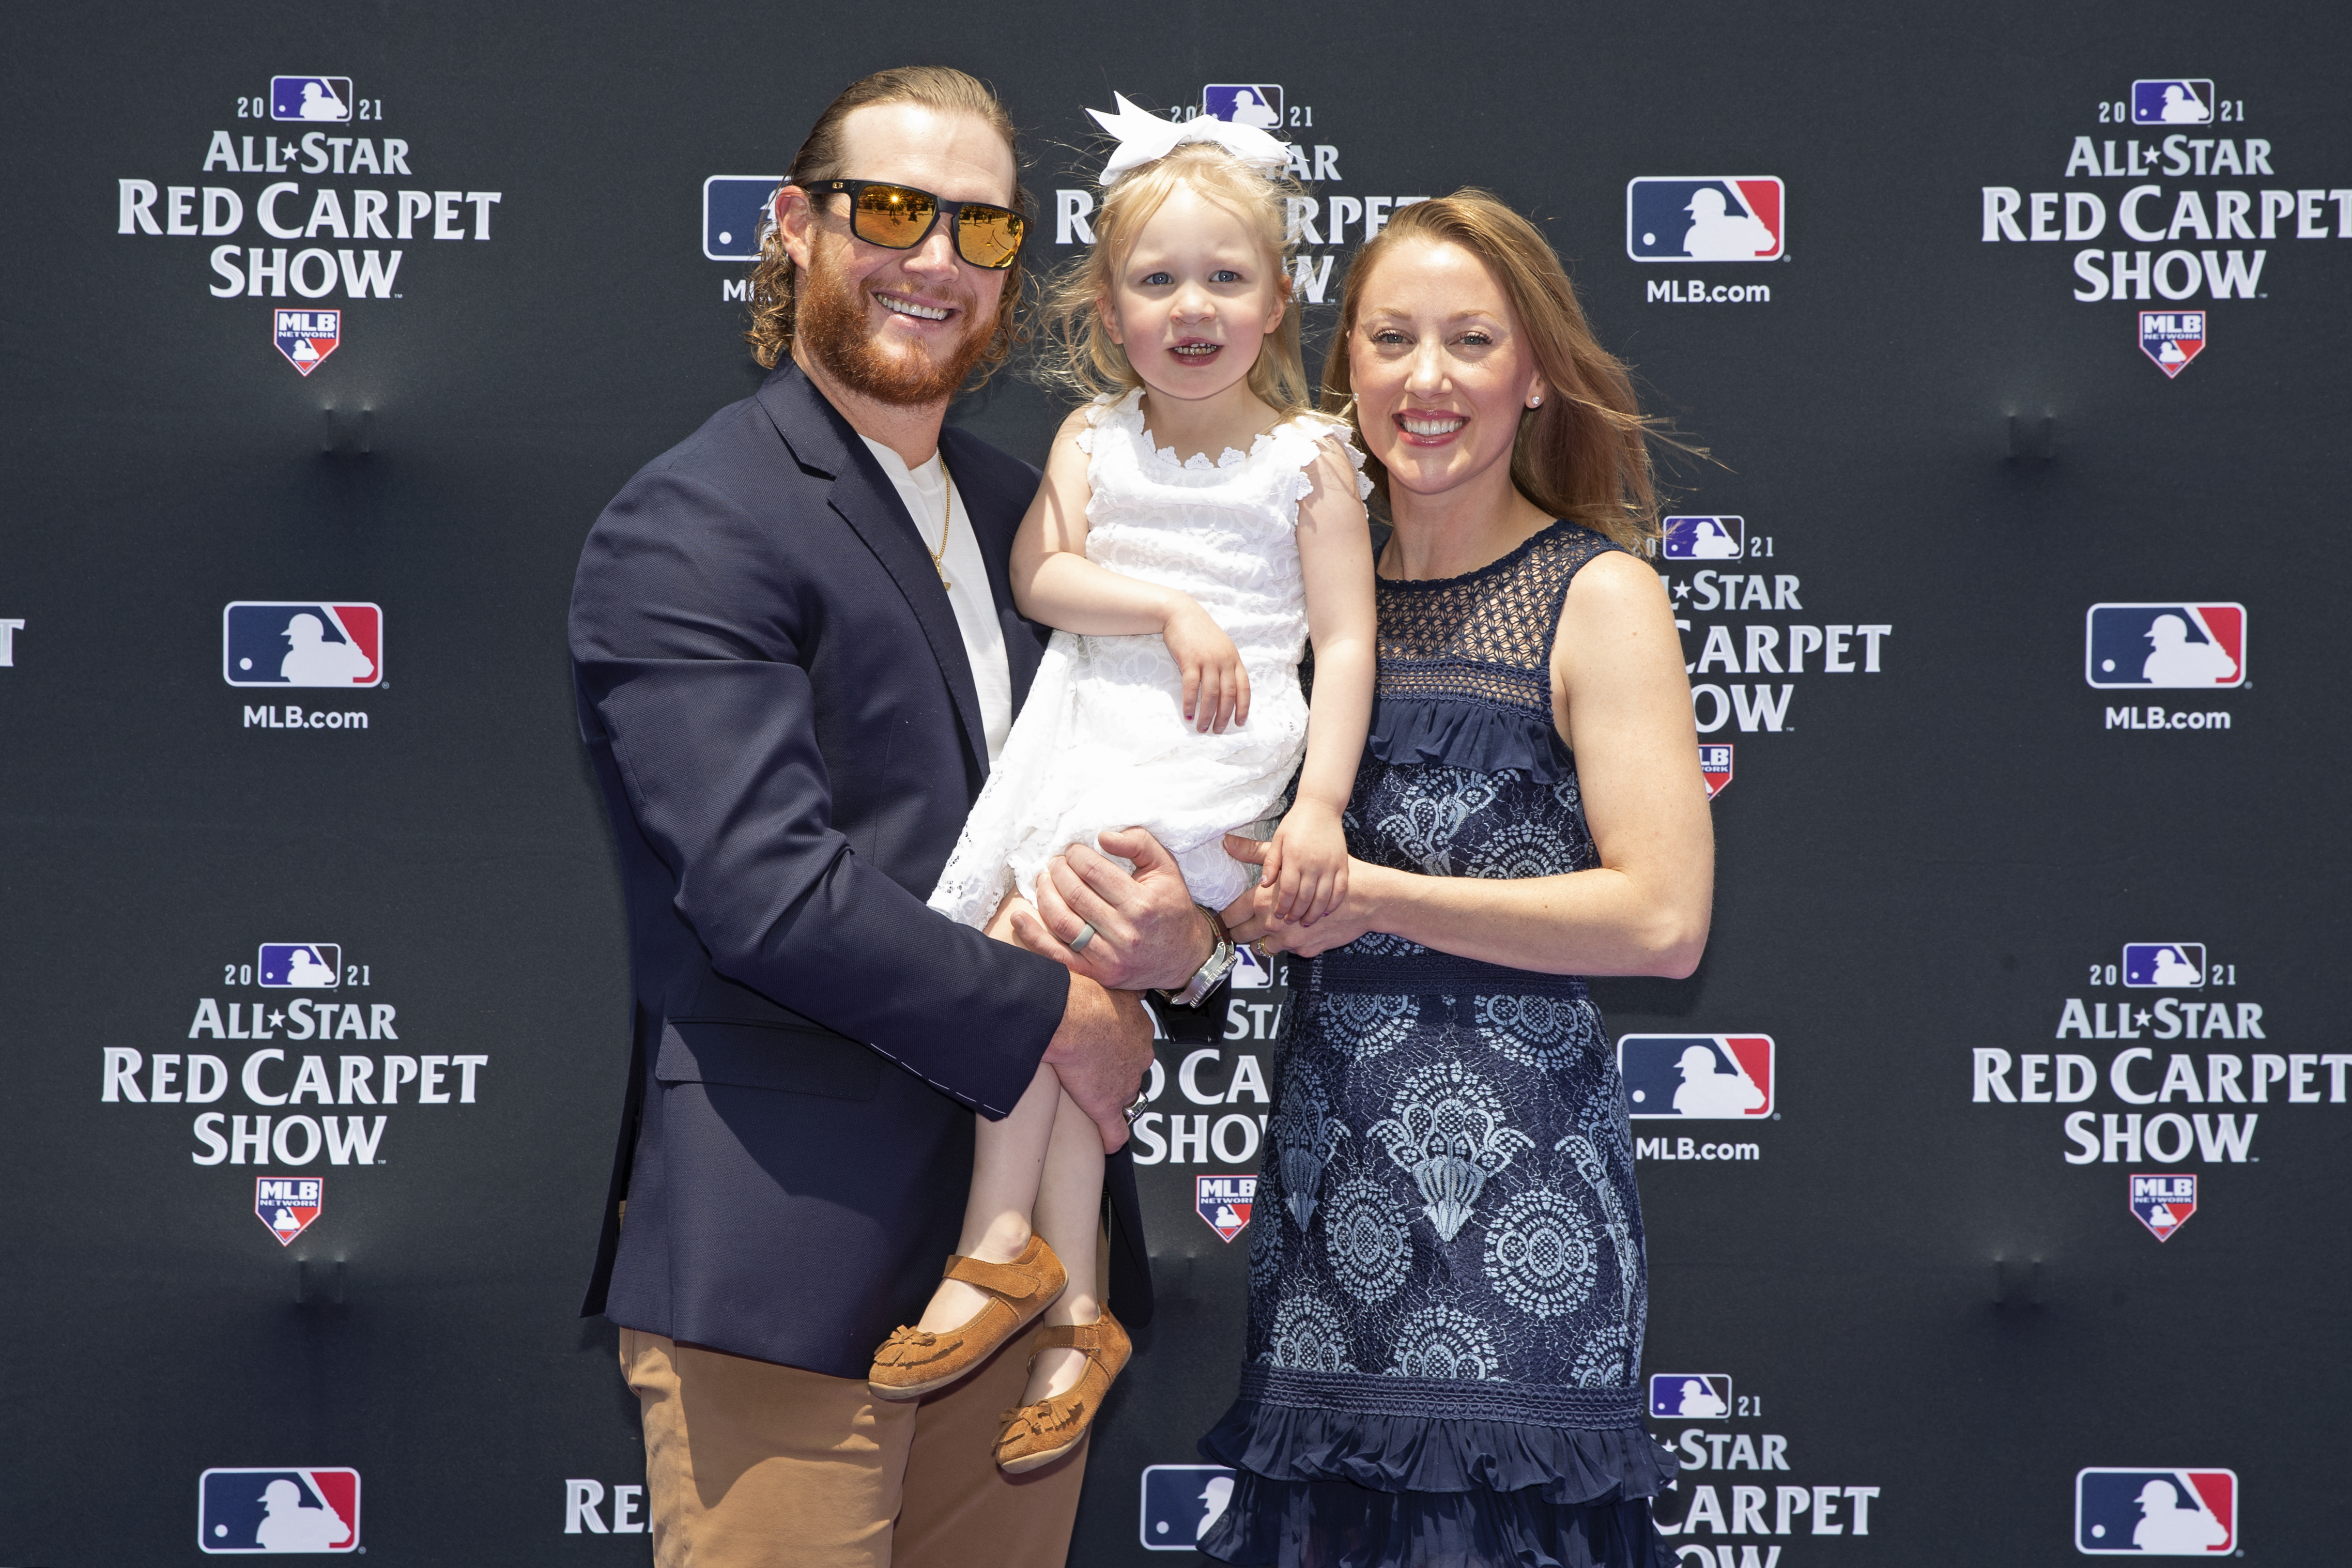 Craig Kimbrel and Ashley Holt Kimbrel with their daughter Lydia Joy Kimbrel attend the MLB All-Star Red Carpet Show at Downtown Colorado on July 13, 2021, in Denver, Colorado. | Source: Getty Images